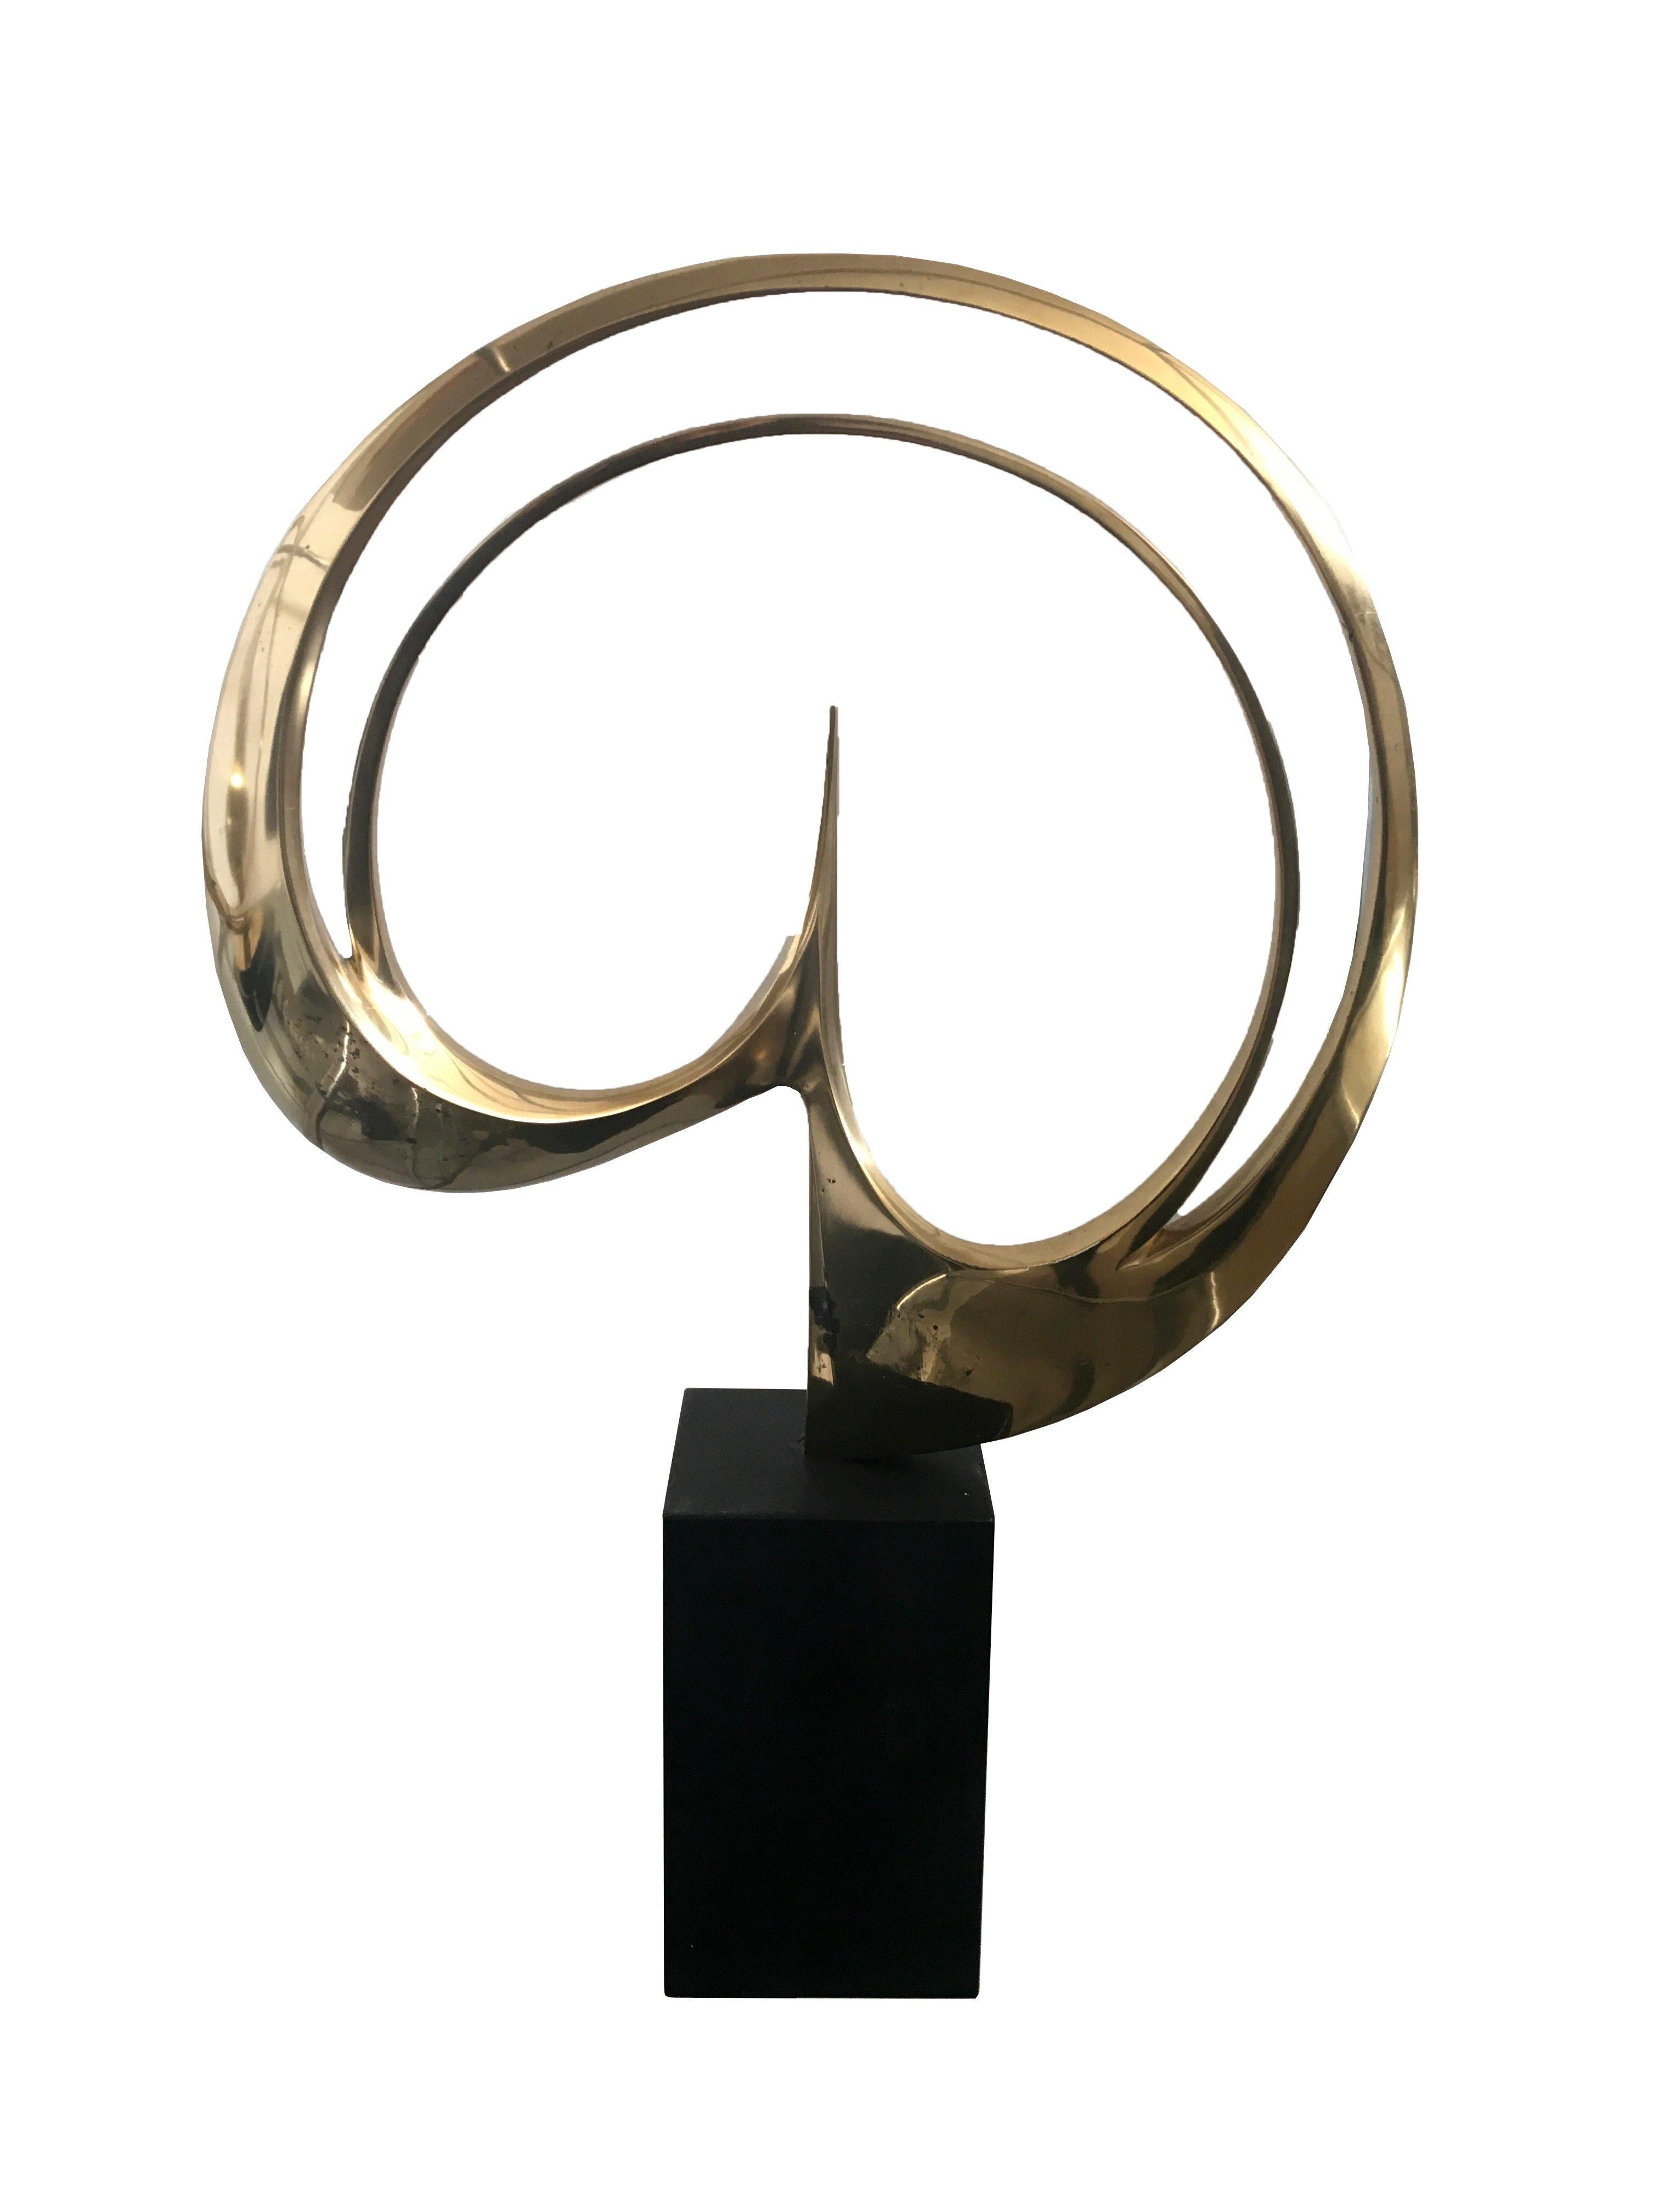 Stopped rounded sphere Carmelo Cappello Abstract Bronze Gold Polished Sculpture 2